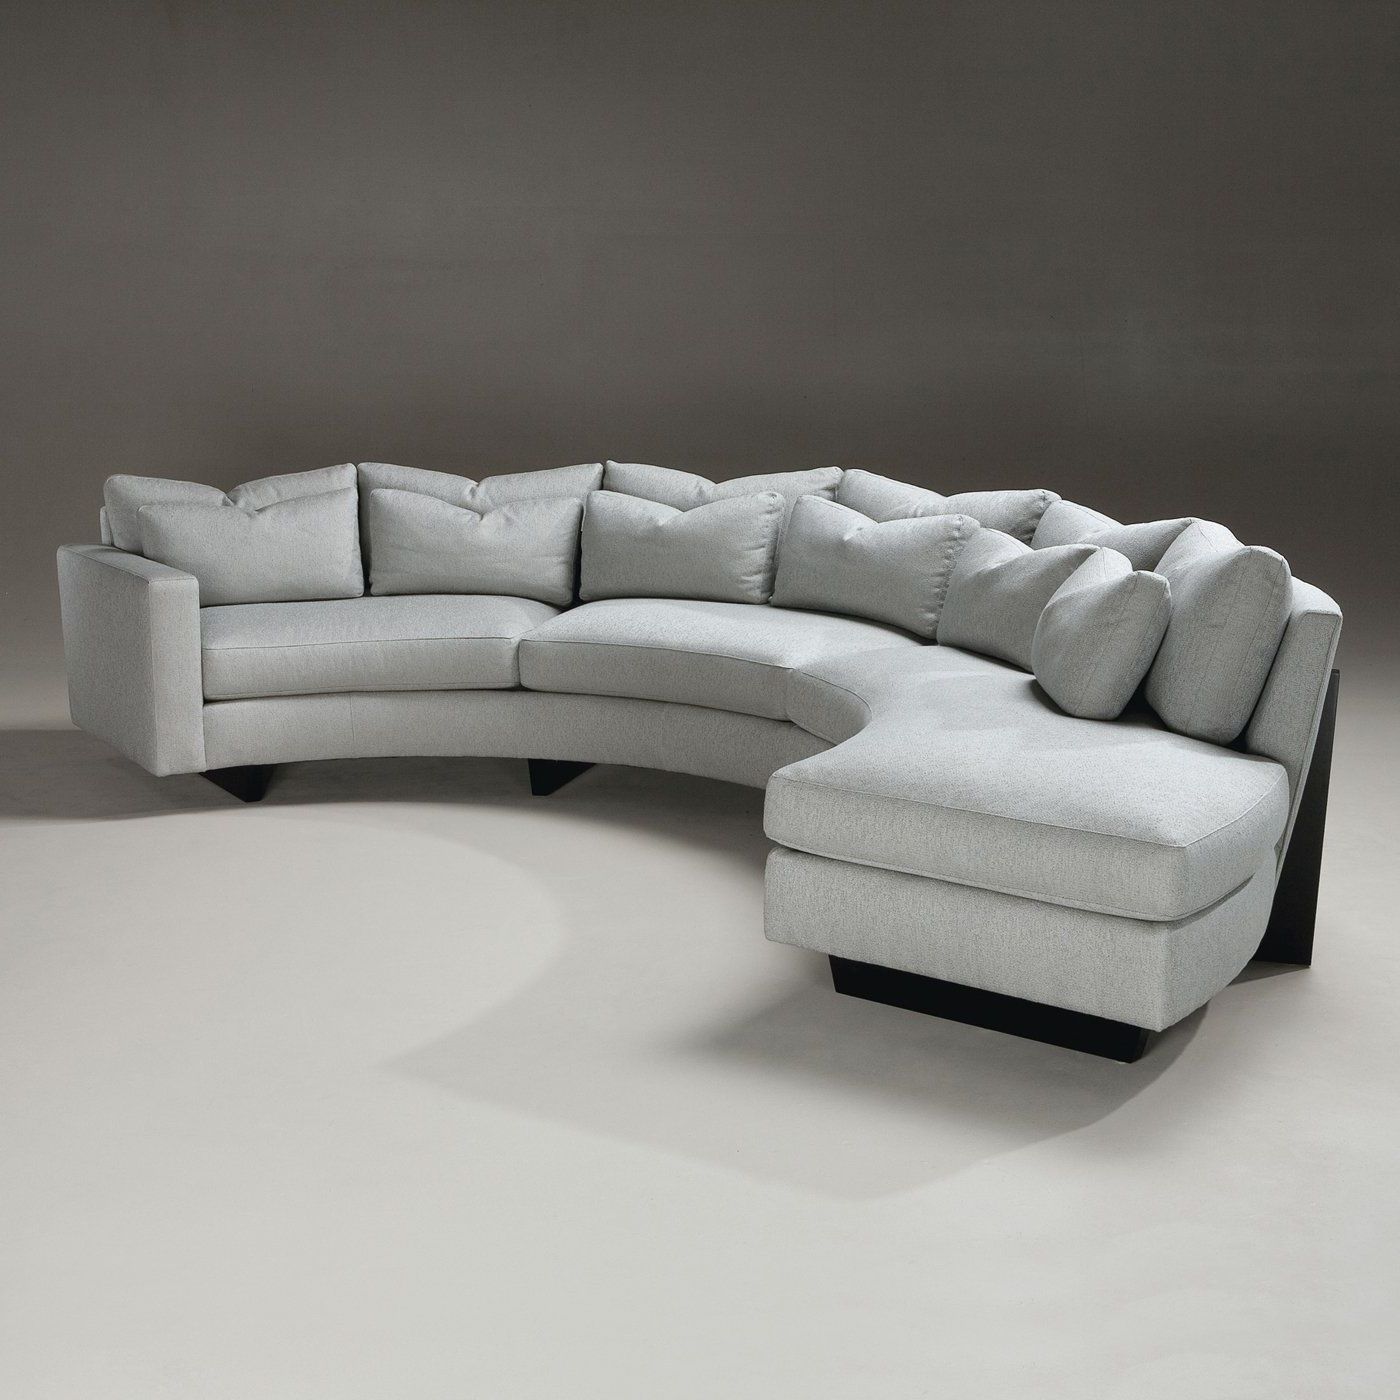 Famous 130" Curved Sectionals Intended For Curved Sectional Sofa With Chaise: The Ultimate In Comfort And Style (View 4 of 15)